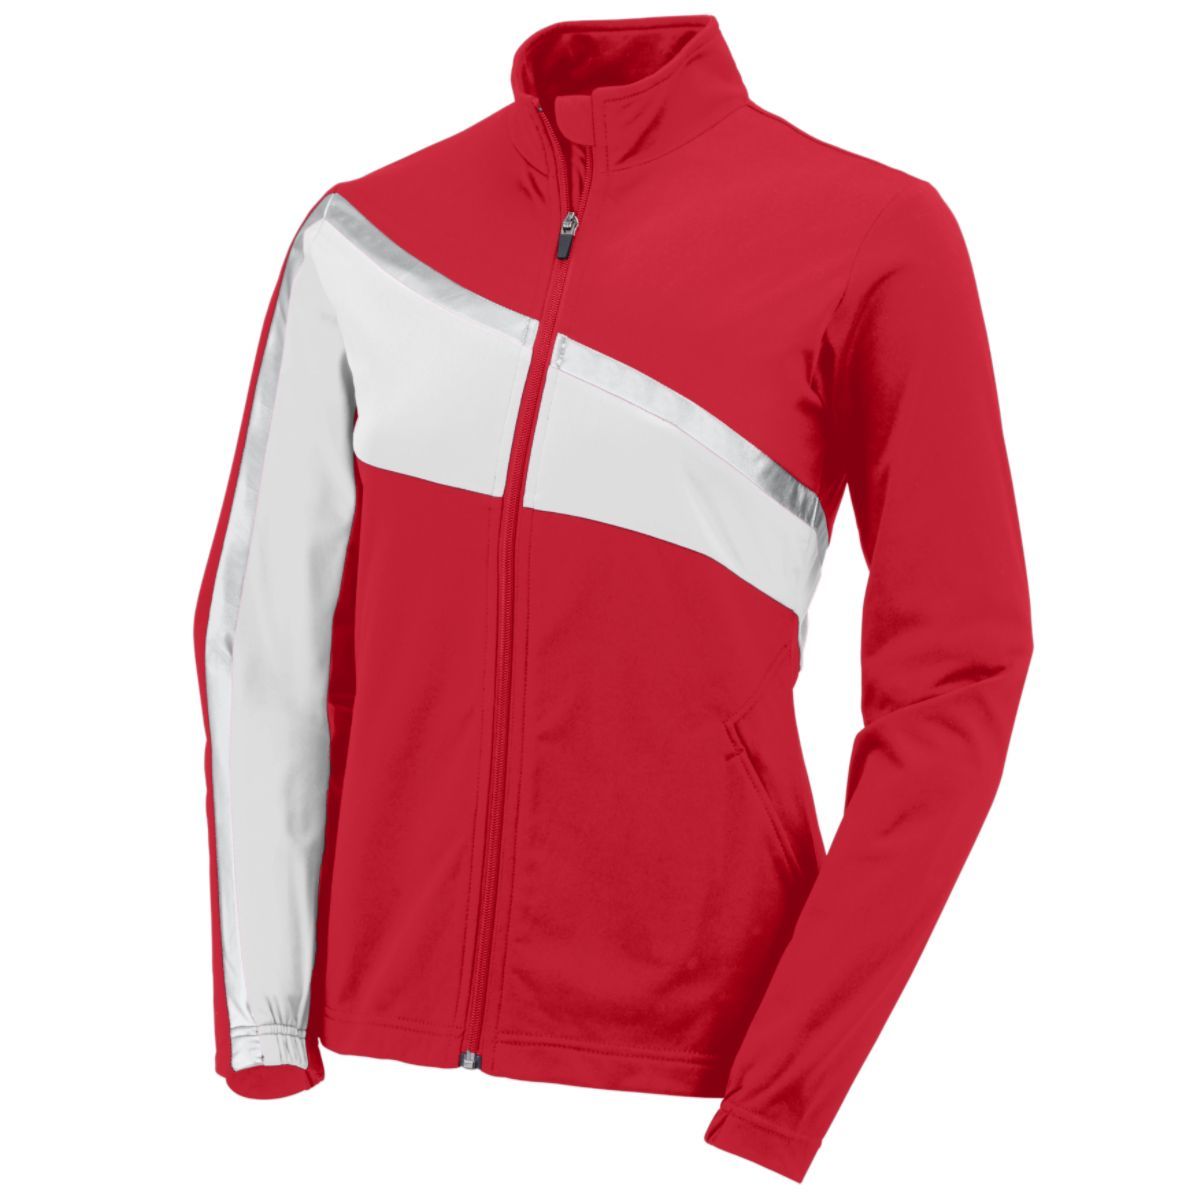 Augusta Sportswear Ladies Aurora Jacket in Red/White/Metallic Silver  -Part of the Ladies, Ladies-Jacket, Augusta-Products, Outerwear product lines at KanaleyCreations.com